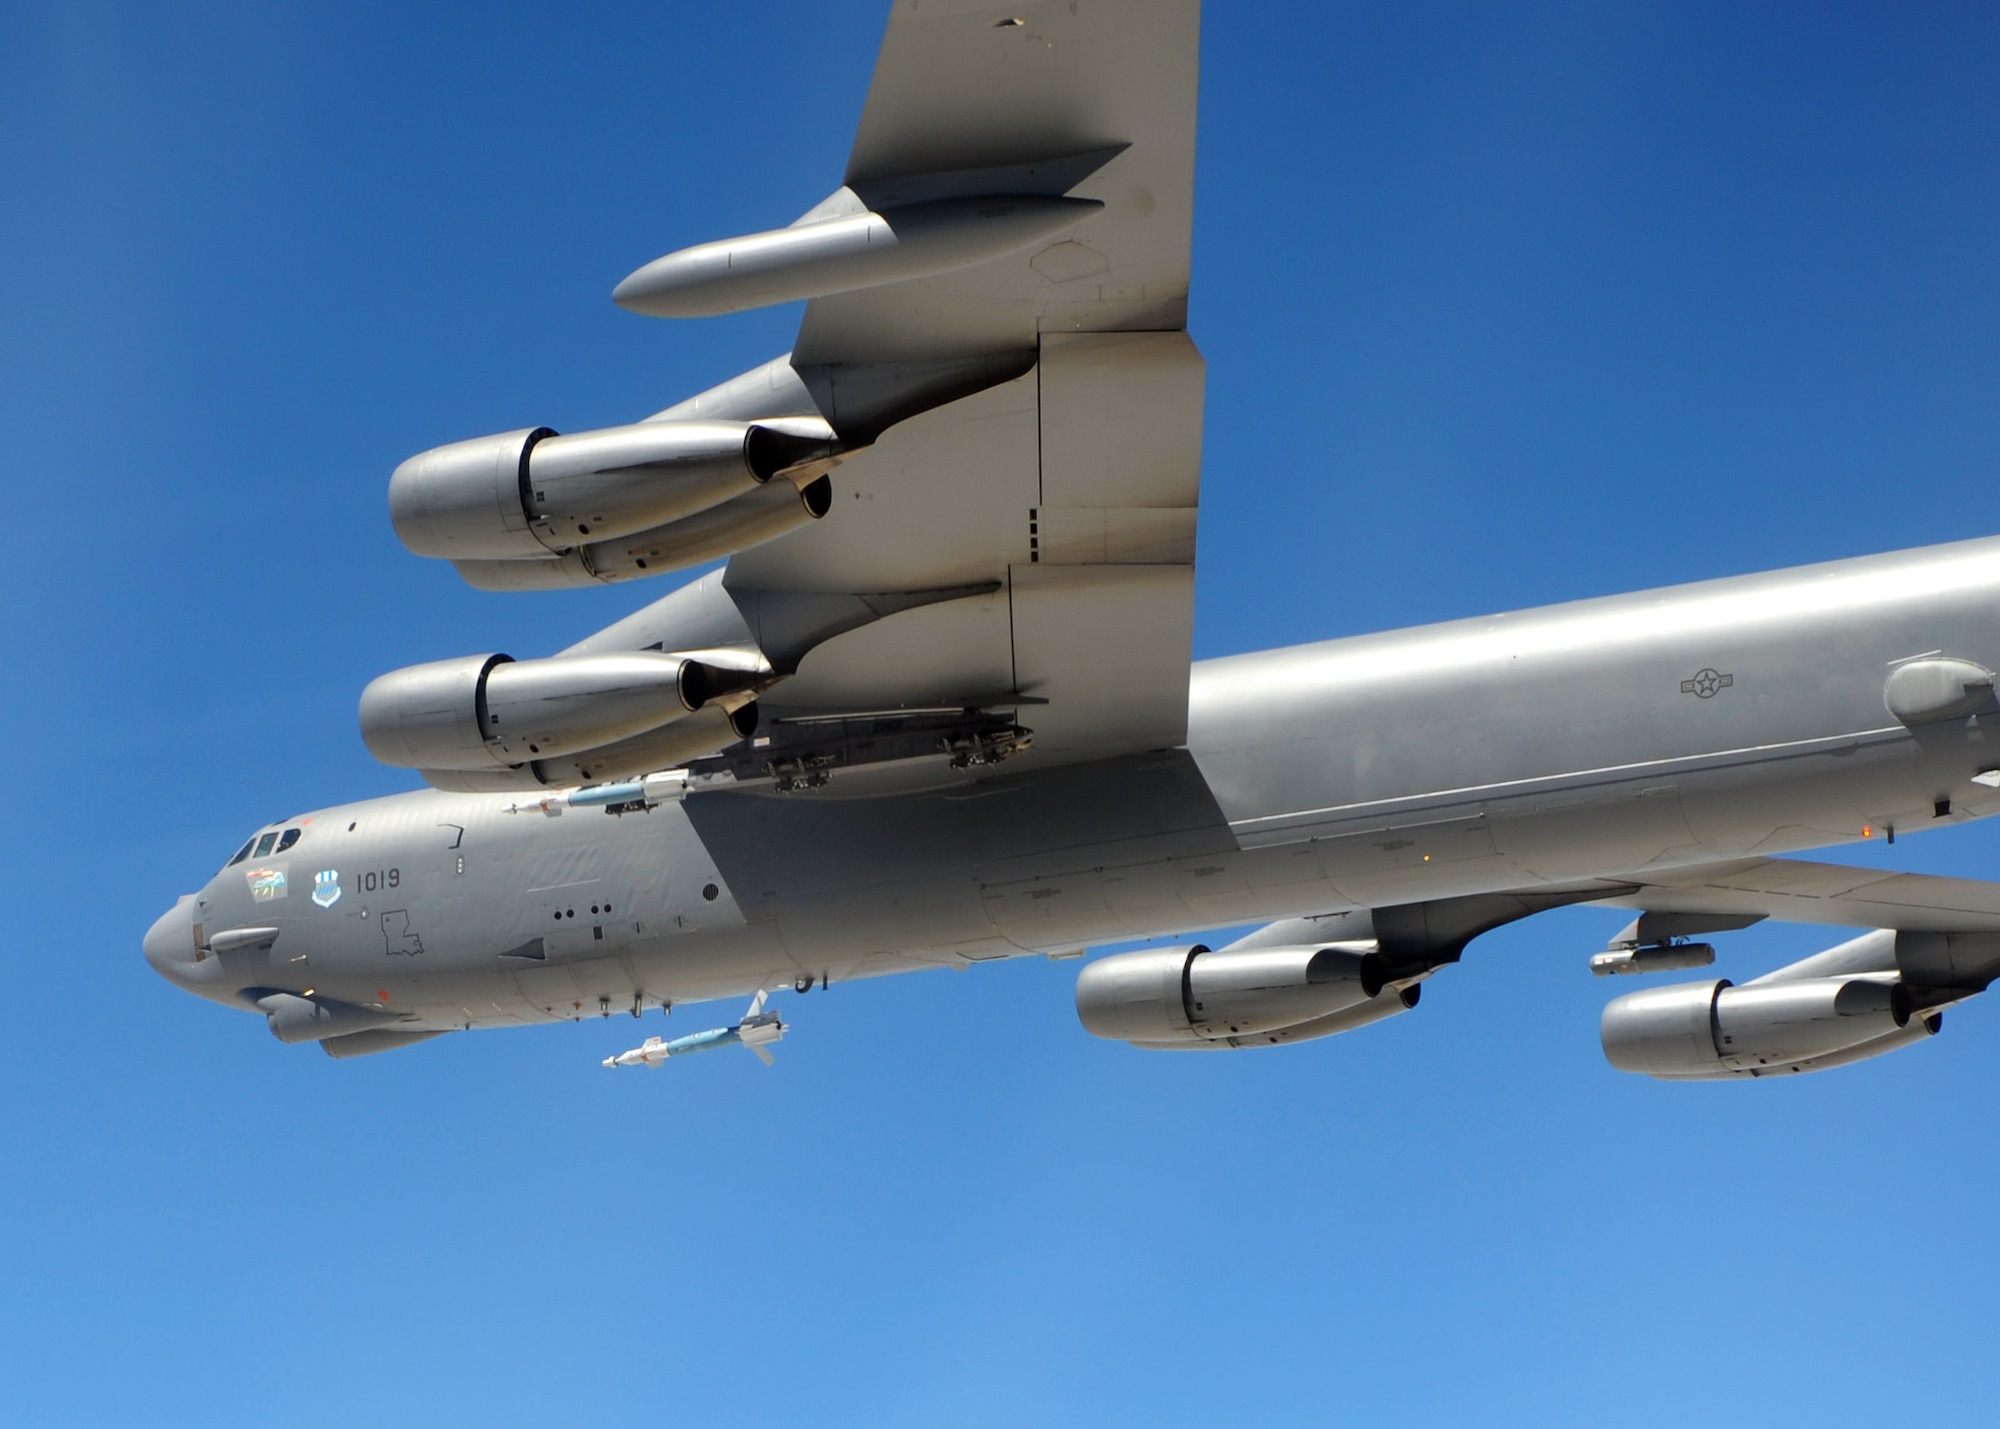 A B-52 Stratofortress from the 2nd Bomb Wing drops a Guided Bomb Unit-12 during a Combat Hammer mission at Hill Air Force Base, Utah. Combat Hammer is an Air-to-Ground Weapons System Evaluation Program maintained by the 86th Fighter Weapons Squadron.  Combat Hammer marked the first of three weeks of evaluation at Hill AFB by the 53rd Weapons Evaluation Group.  Combat Archer, an air-to-air evaluation, is the second week, followed by a combined air and ground WSEP in the final week.  The WSEP program is used to evaluate the effectiveness and suitability of combat air force weapon systems. The evaluations are accomplished during tactical deliveries of fighter, bomber and unmanned aerial system precision guided munitions, on realistic targets with air-to-air and surface-to-air defenses. For many of the aircrew participating in WSEP, it is the first time employing live weapons. This provides a level of combat experience many units face during combat. (Courtesy photo.)